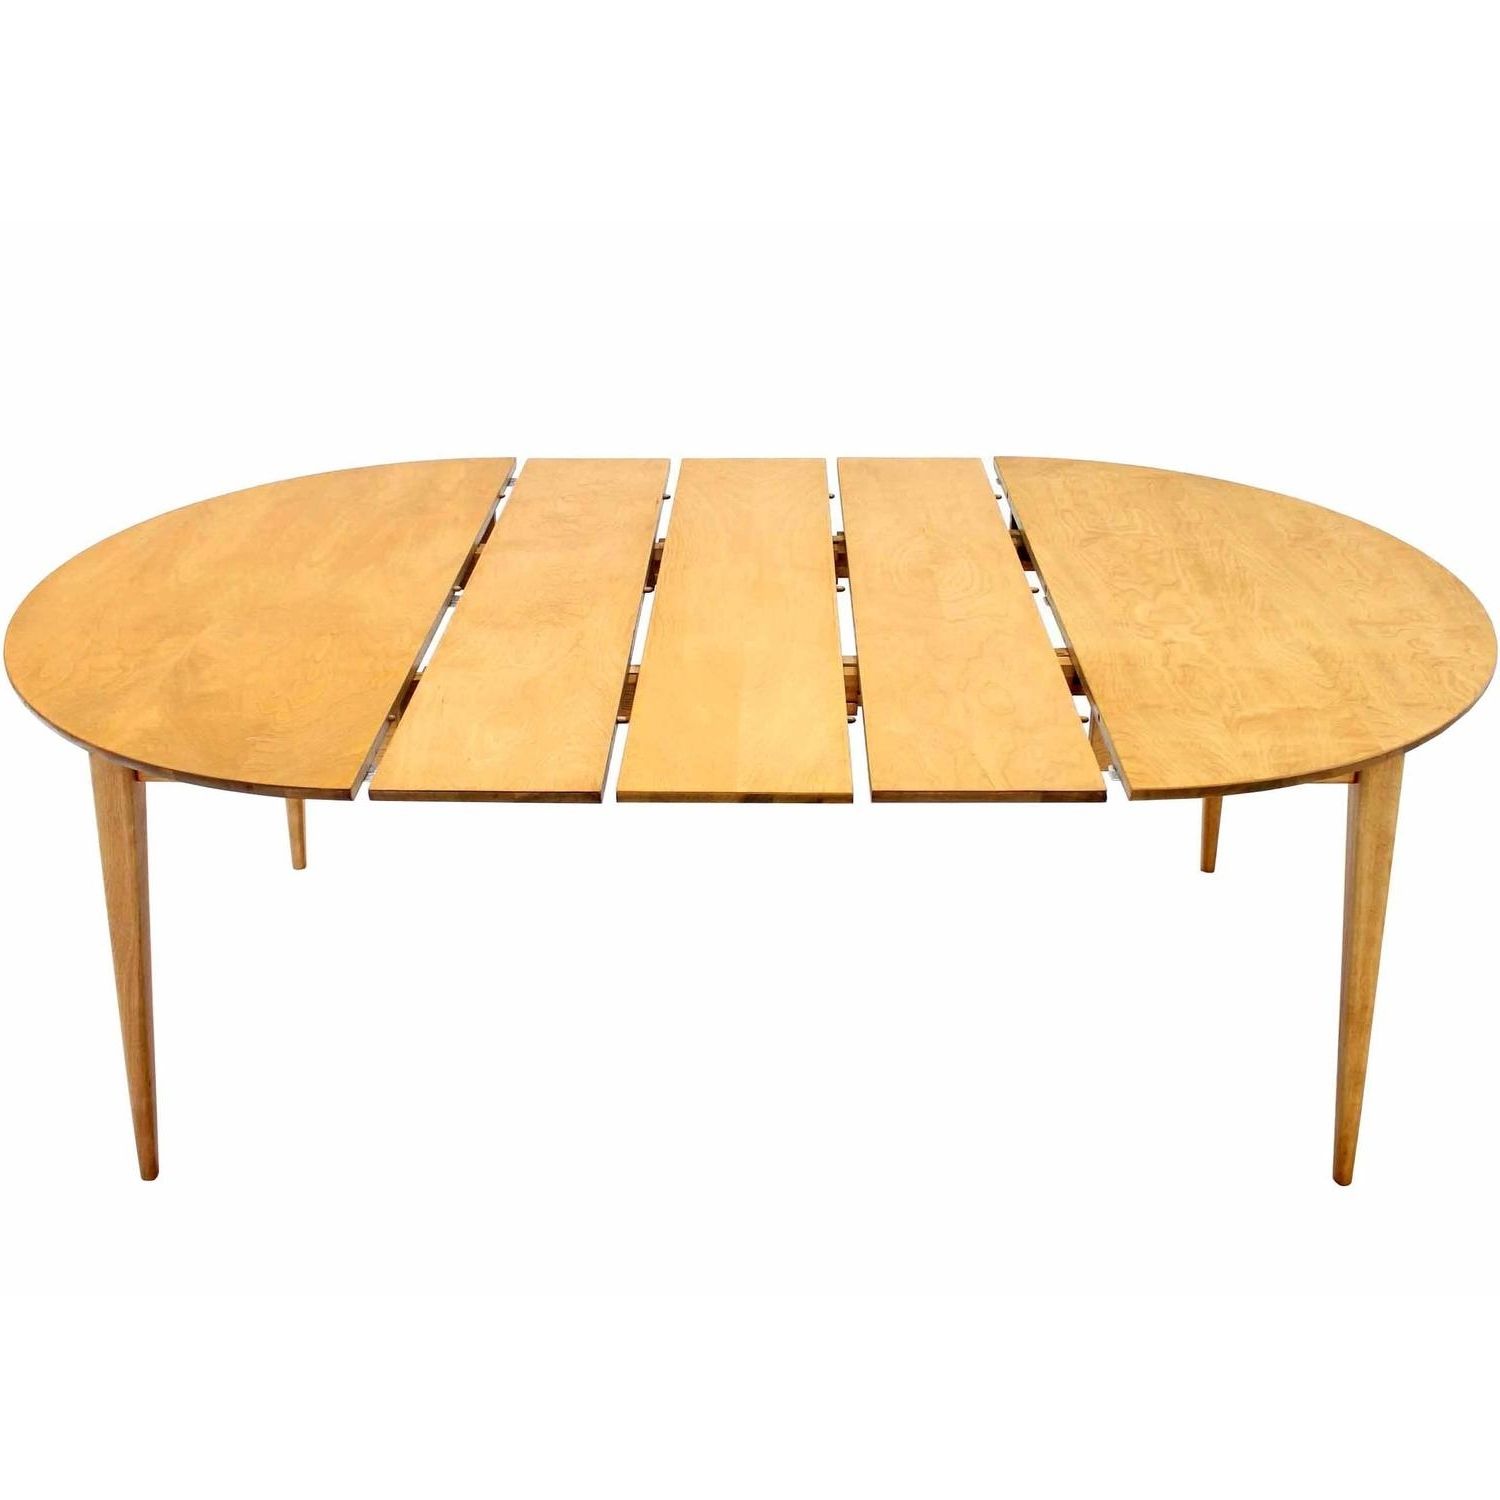 Fashionable Birch Dining Tables With Round Birch Dining Table With Three Leaves At 1stdibs (View 12 of 25)